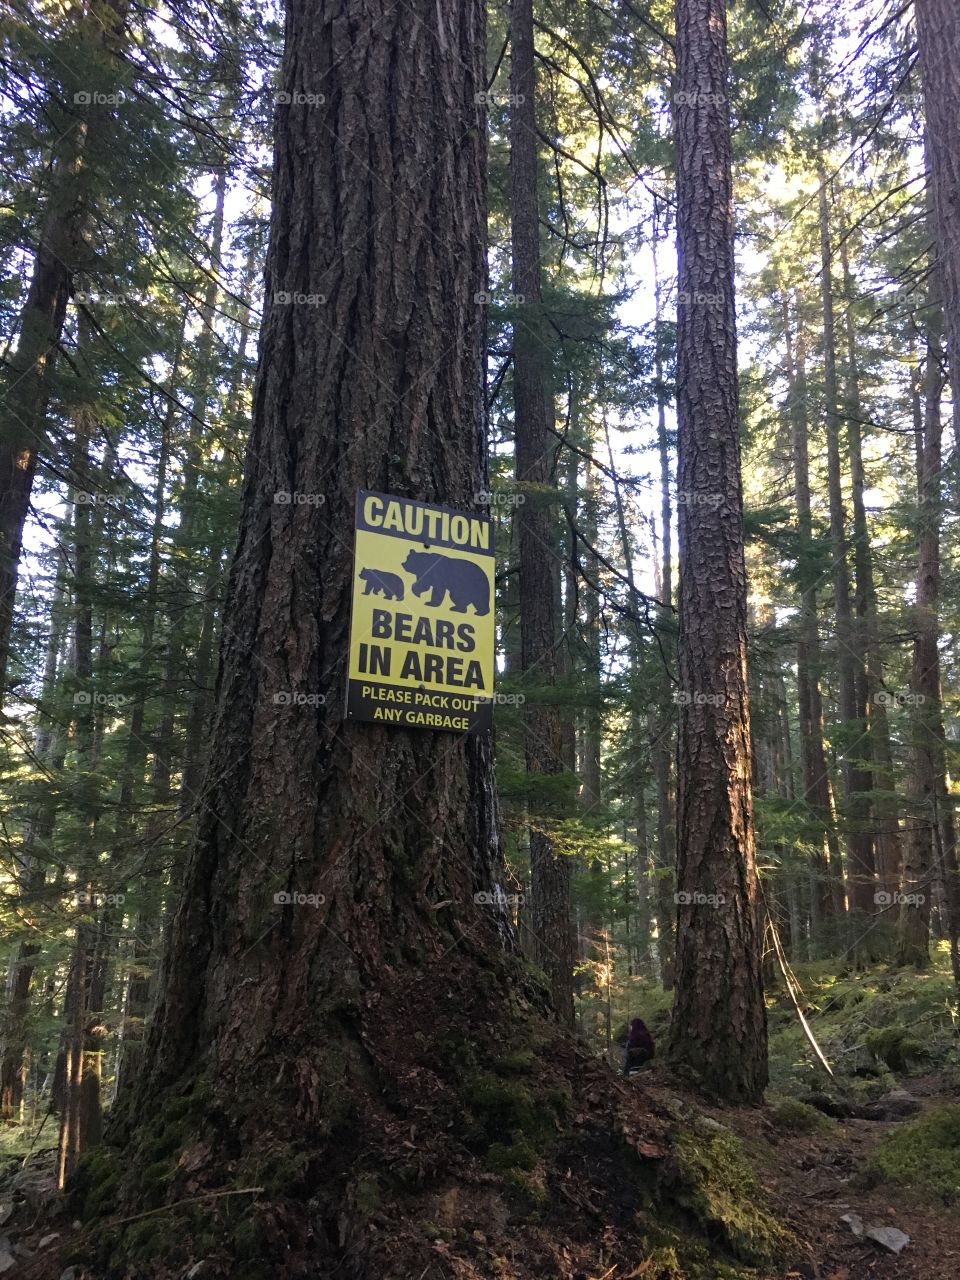 Caution Bears in the area 